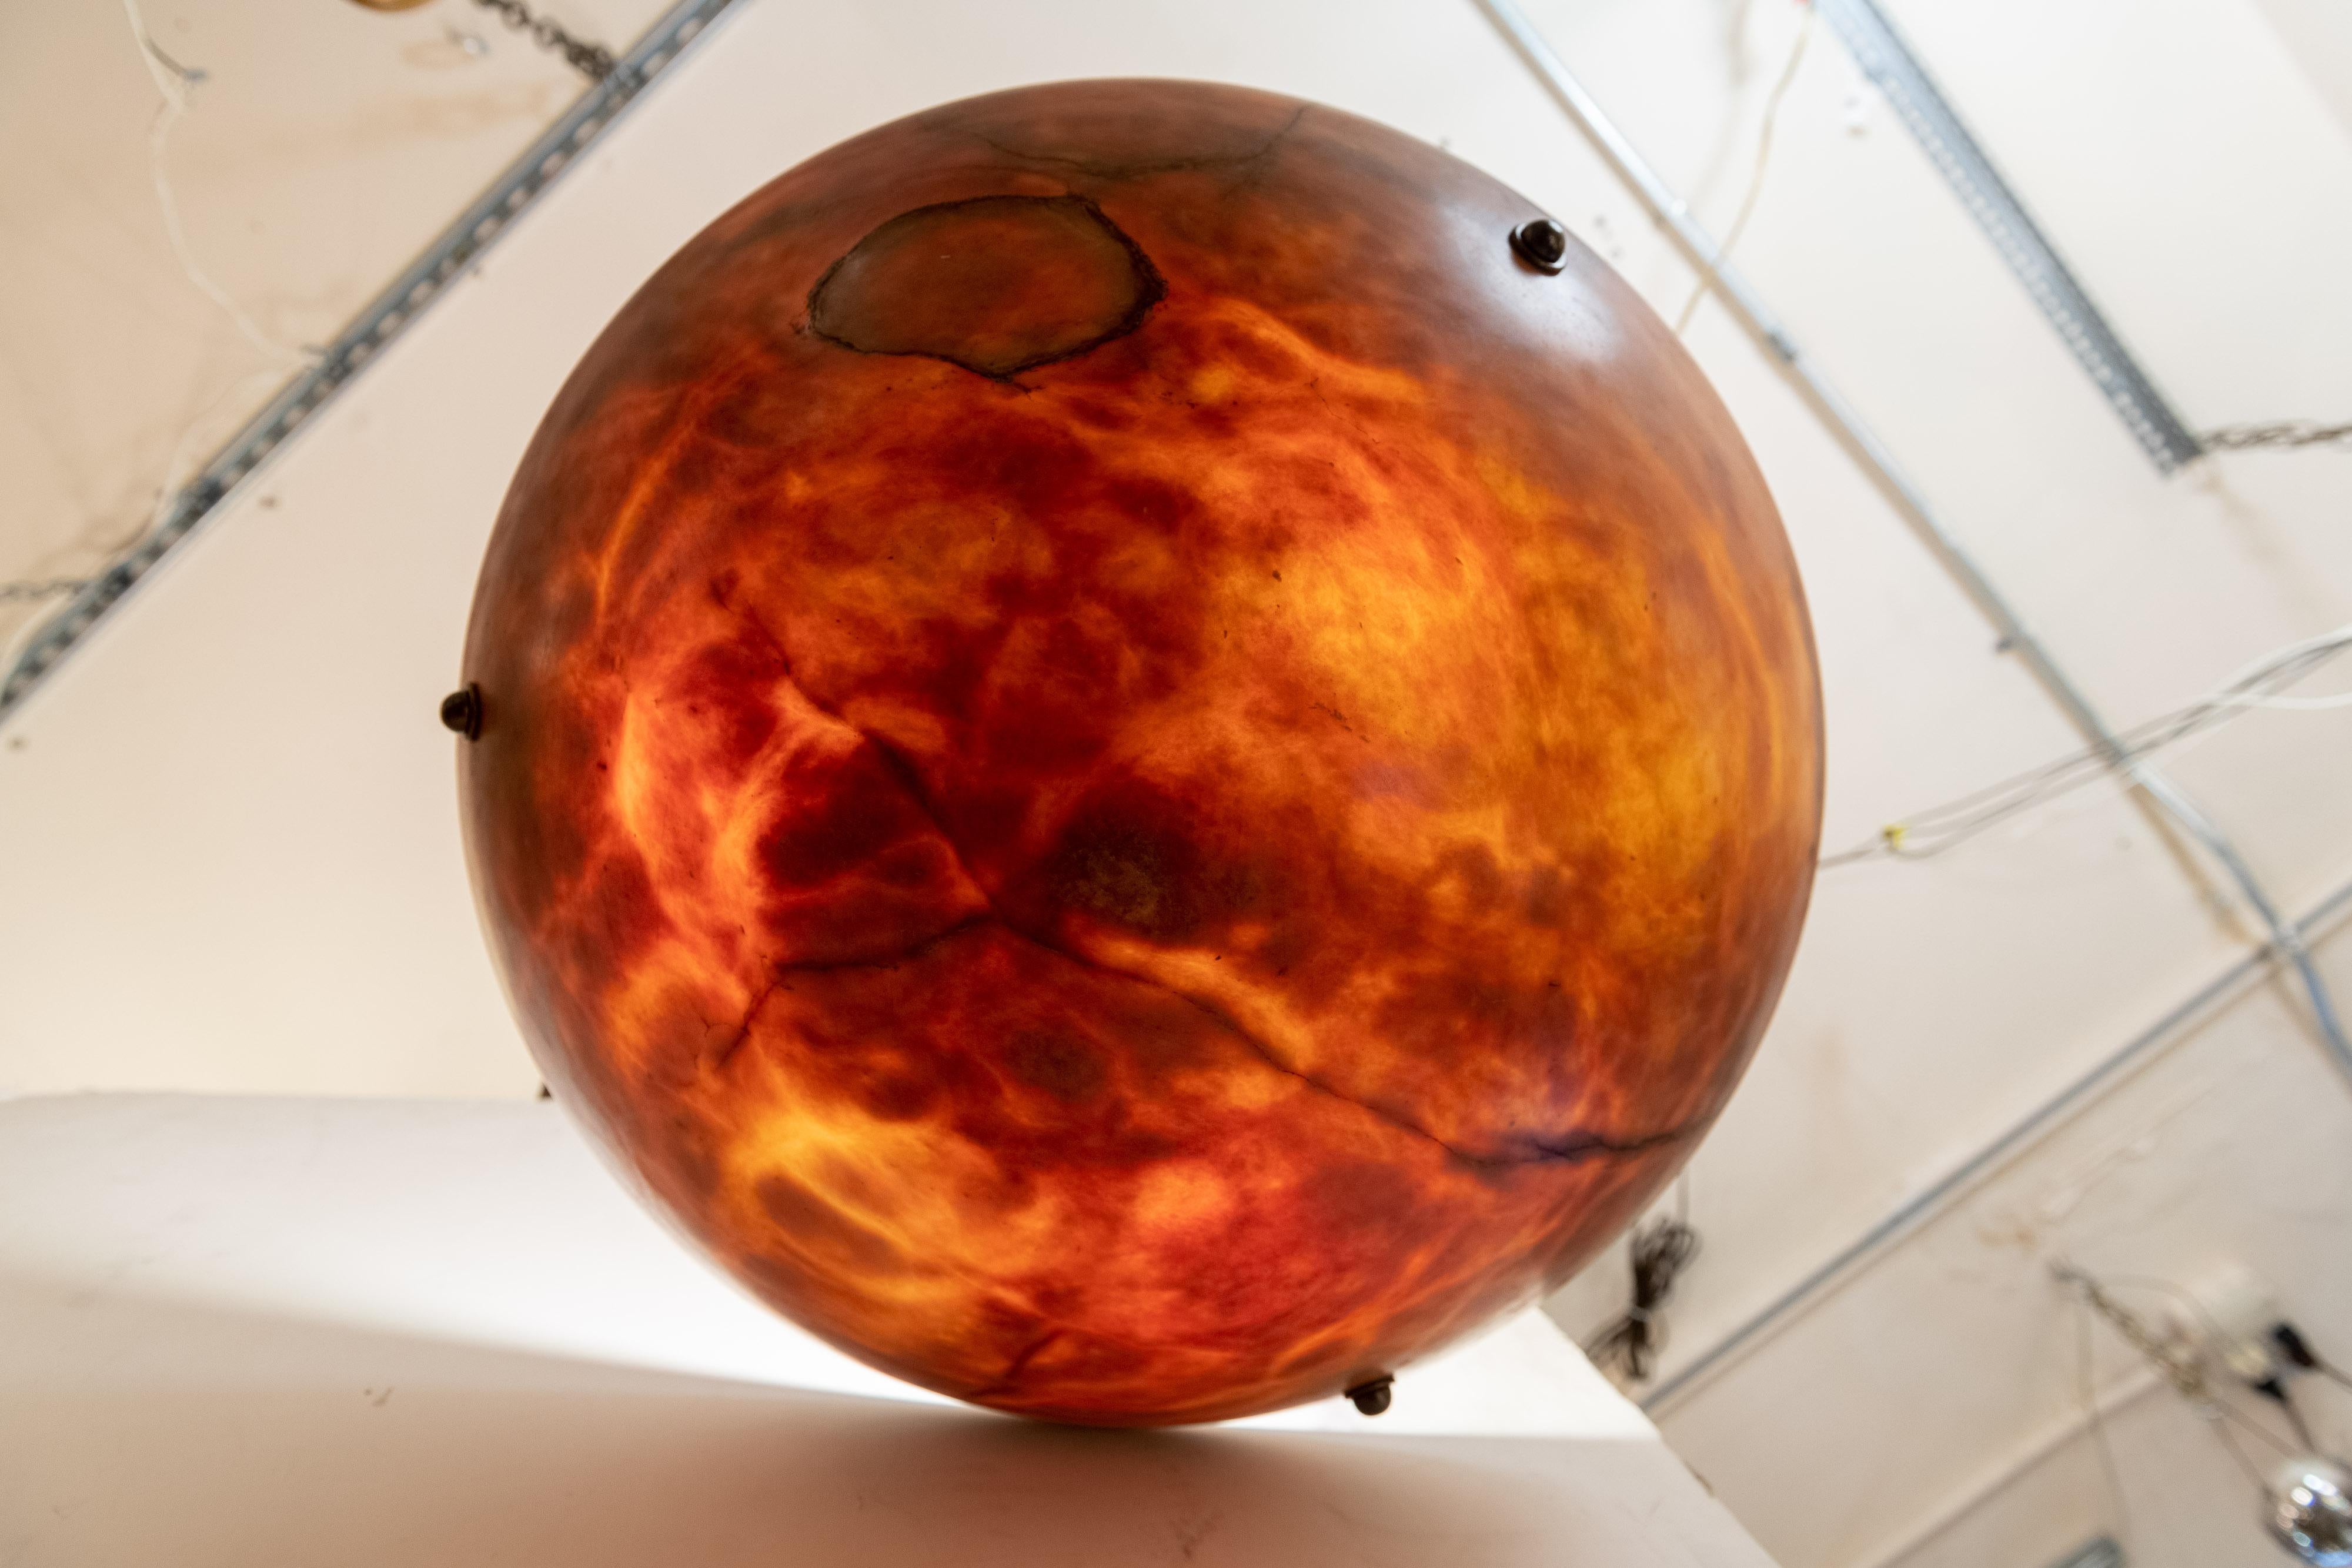 Alabaster pendants are one of our best selling areas of antique lighting, and here we are offering a big 24'' diameter pendant. Mostly amber with some unusual black fissures and veins. 3 porcelain sockets and newly wired to handle 100 watt bulbs if